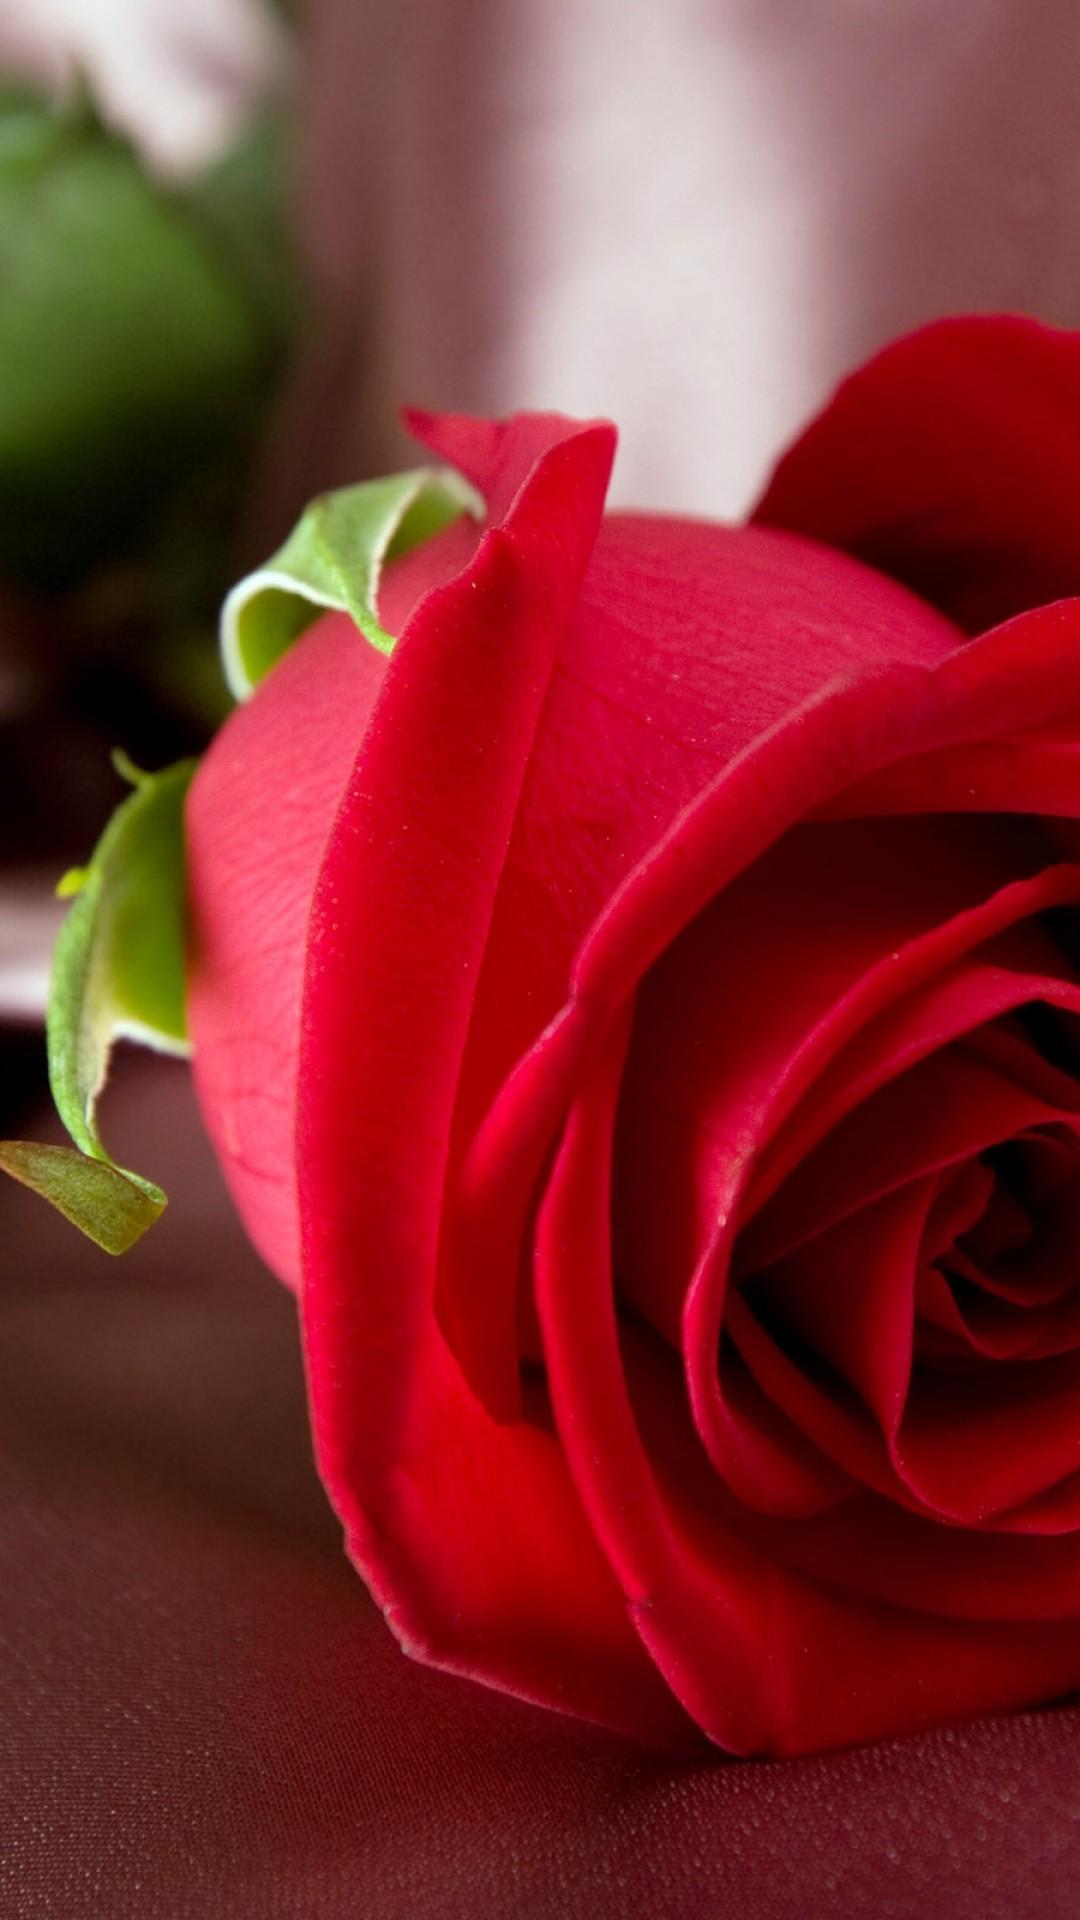 Red Rose Hd Wallpaper For Mobile